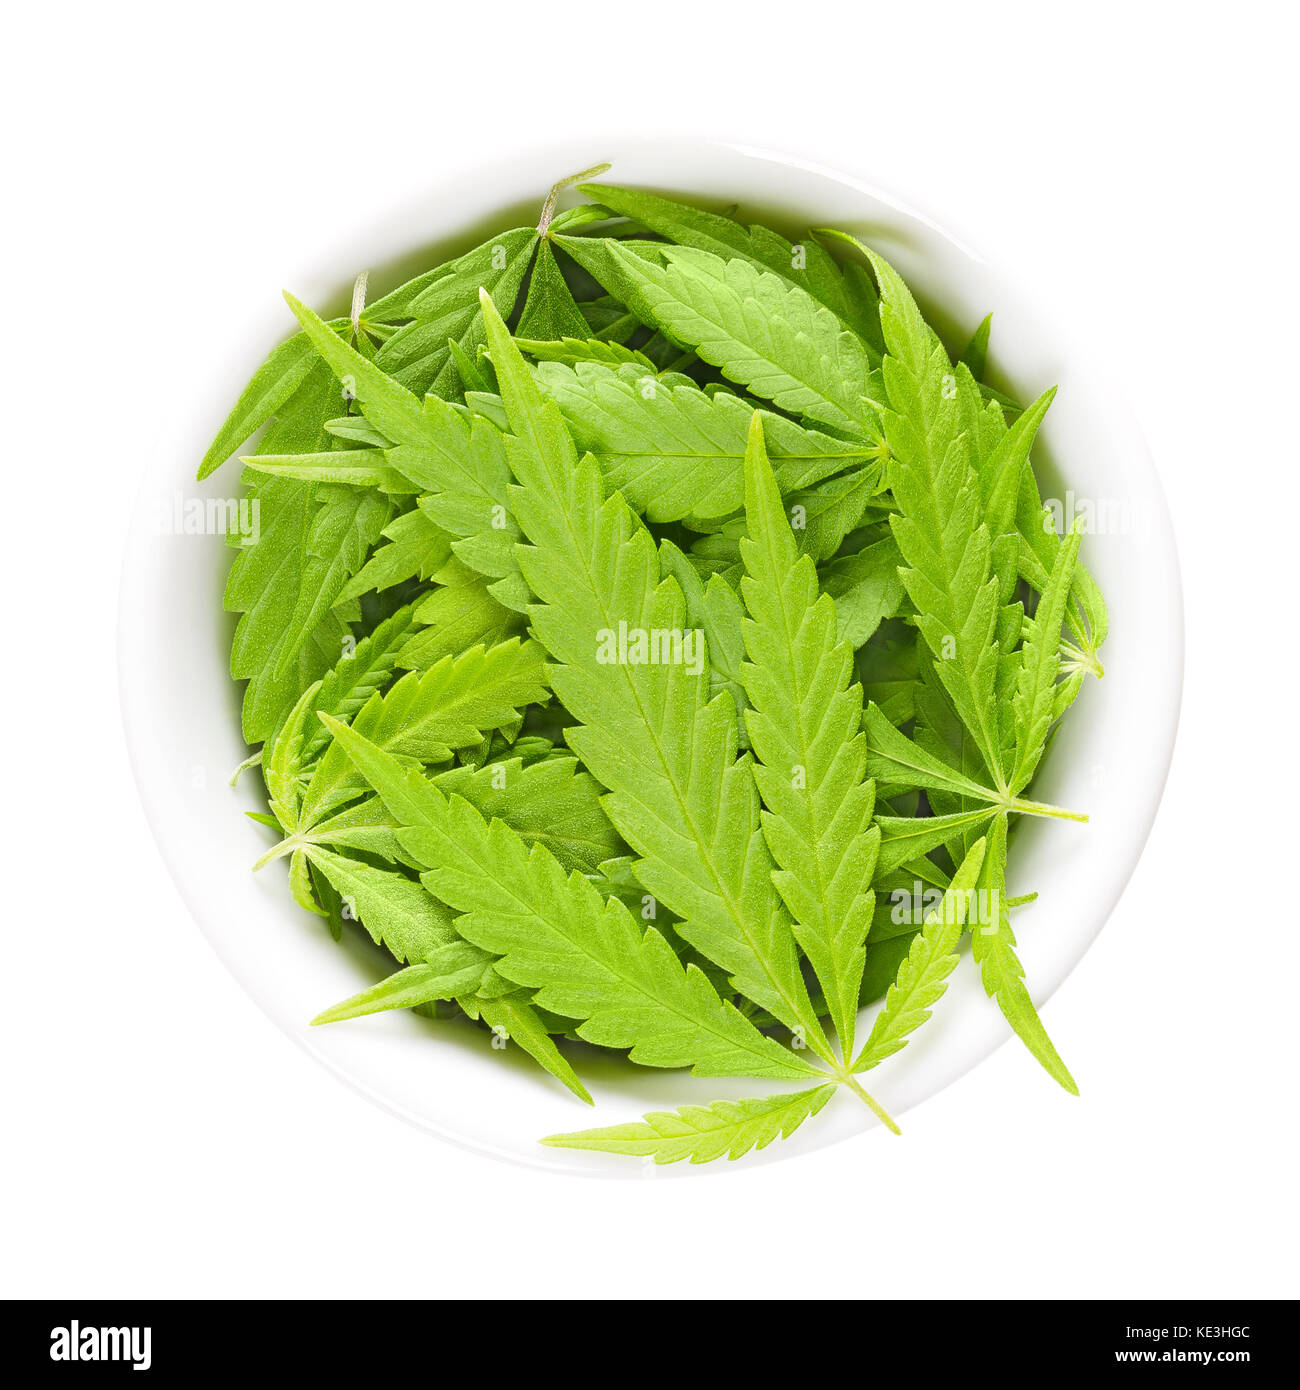 Cannabis leaves in white porcelain bowl. Fresh hemp fan leaves of Cannabis ruderalis. Low THC species used as tea and as herbal medicine. Stock Photo